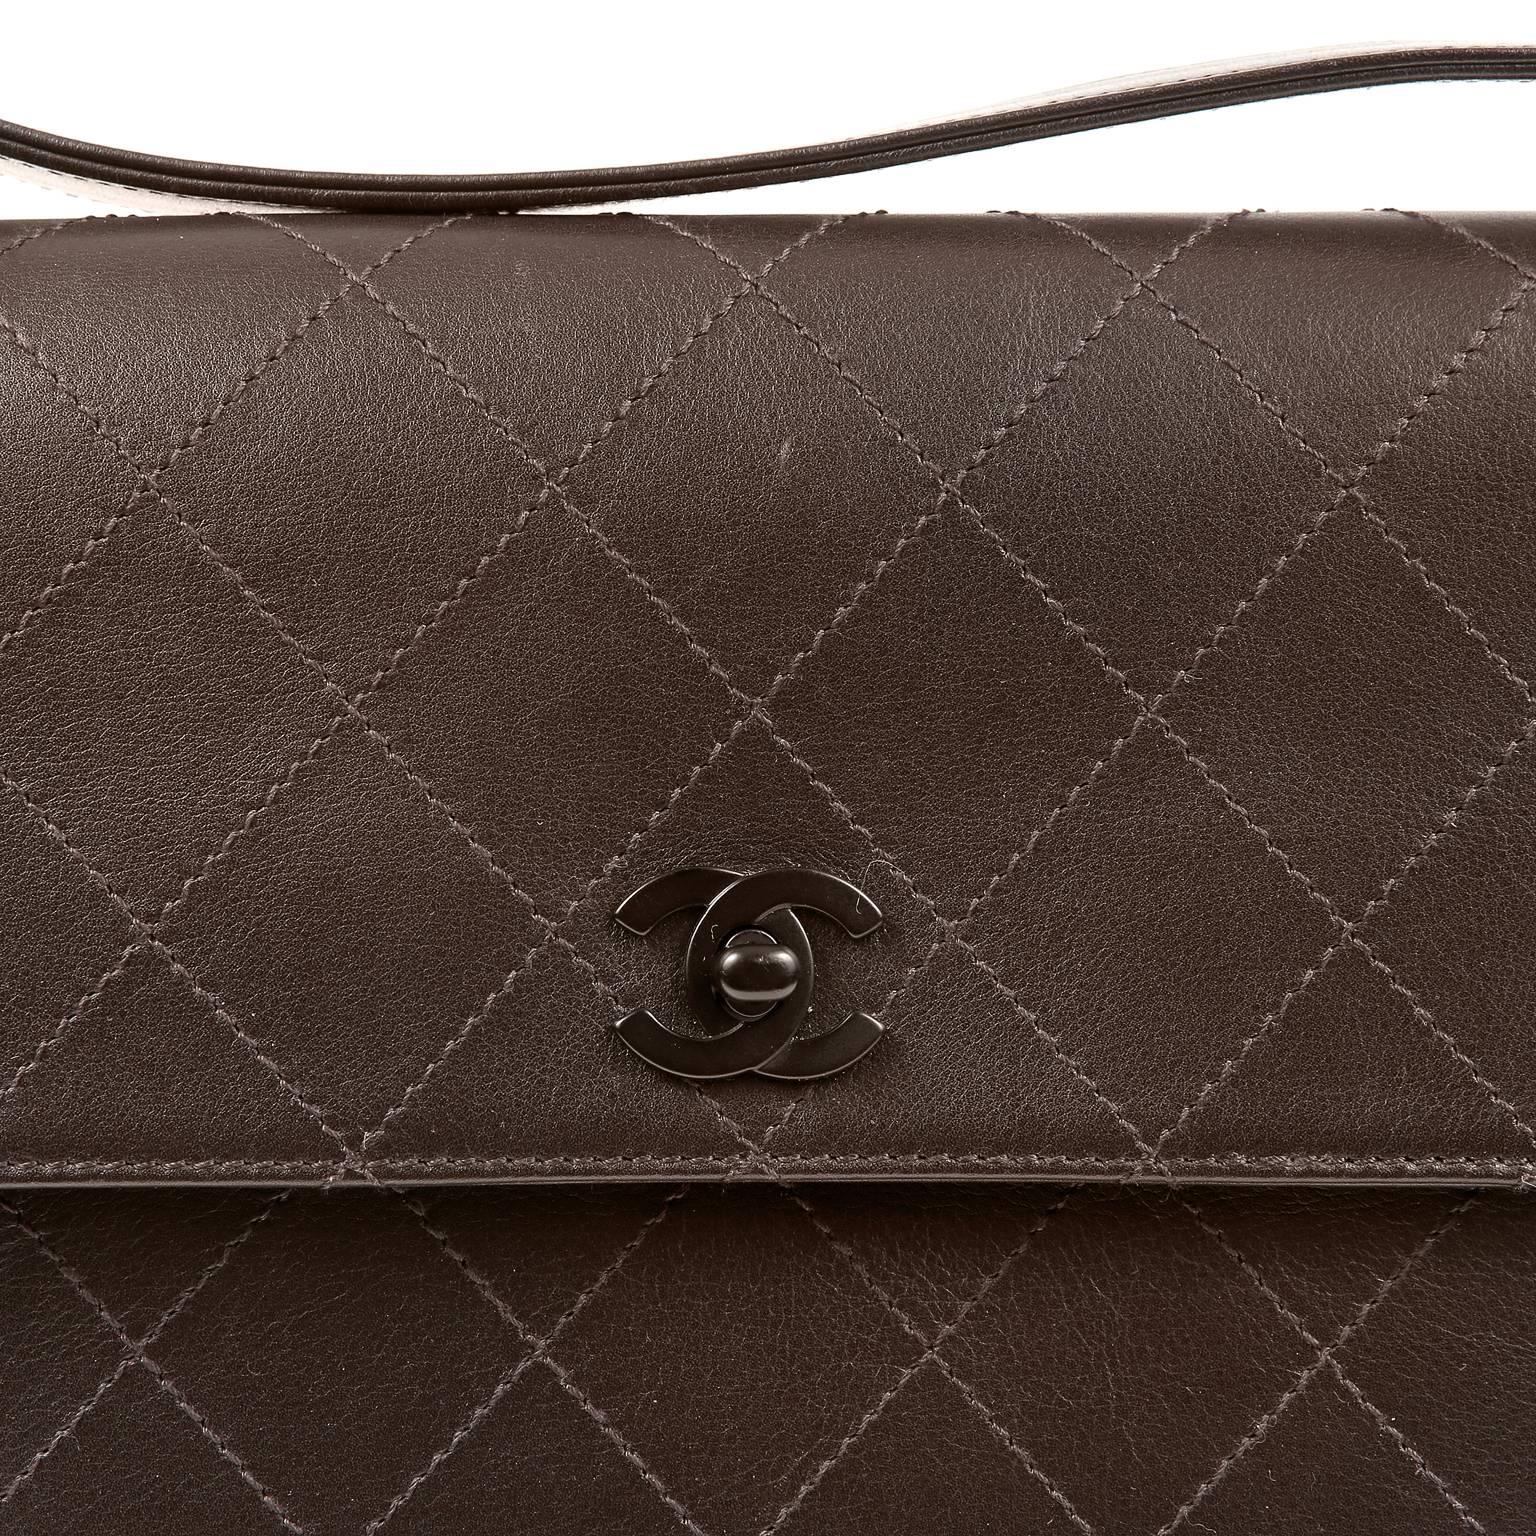 Women's Chanel Brown Leather Flat Stitched Shoulder Bag For Sale